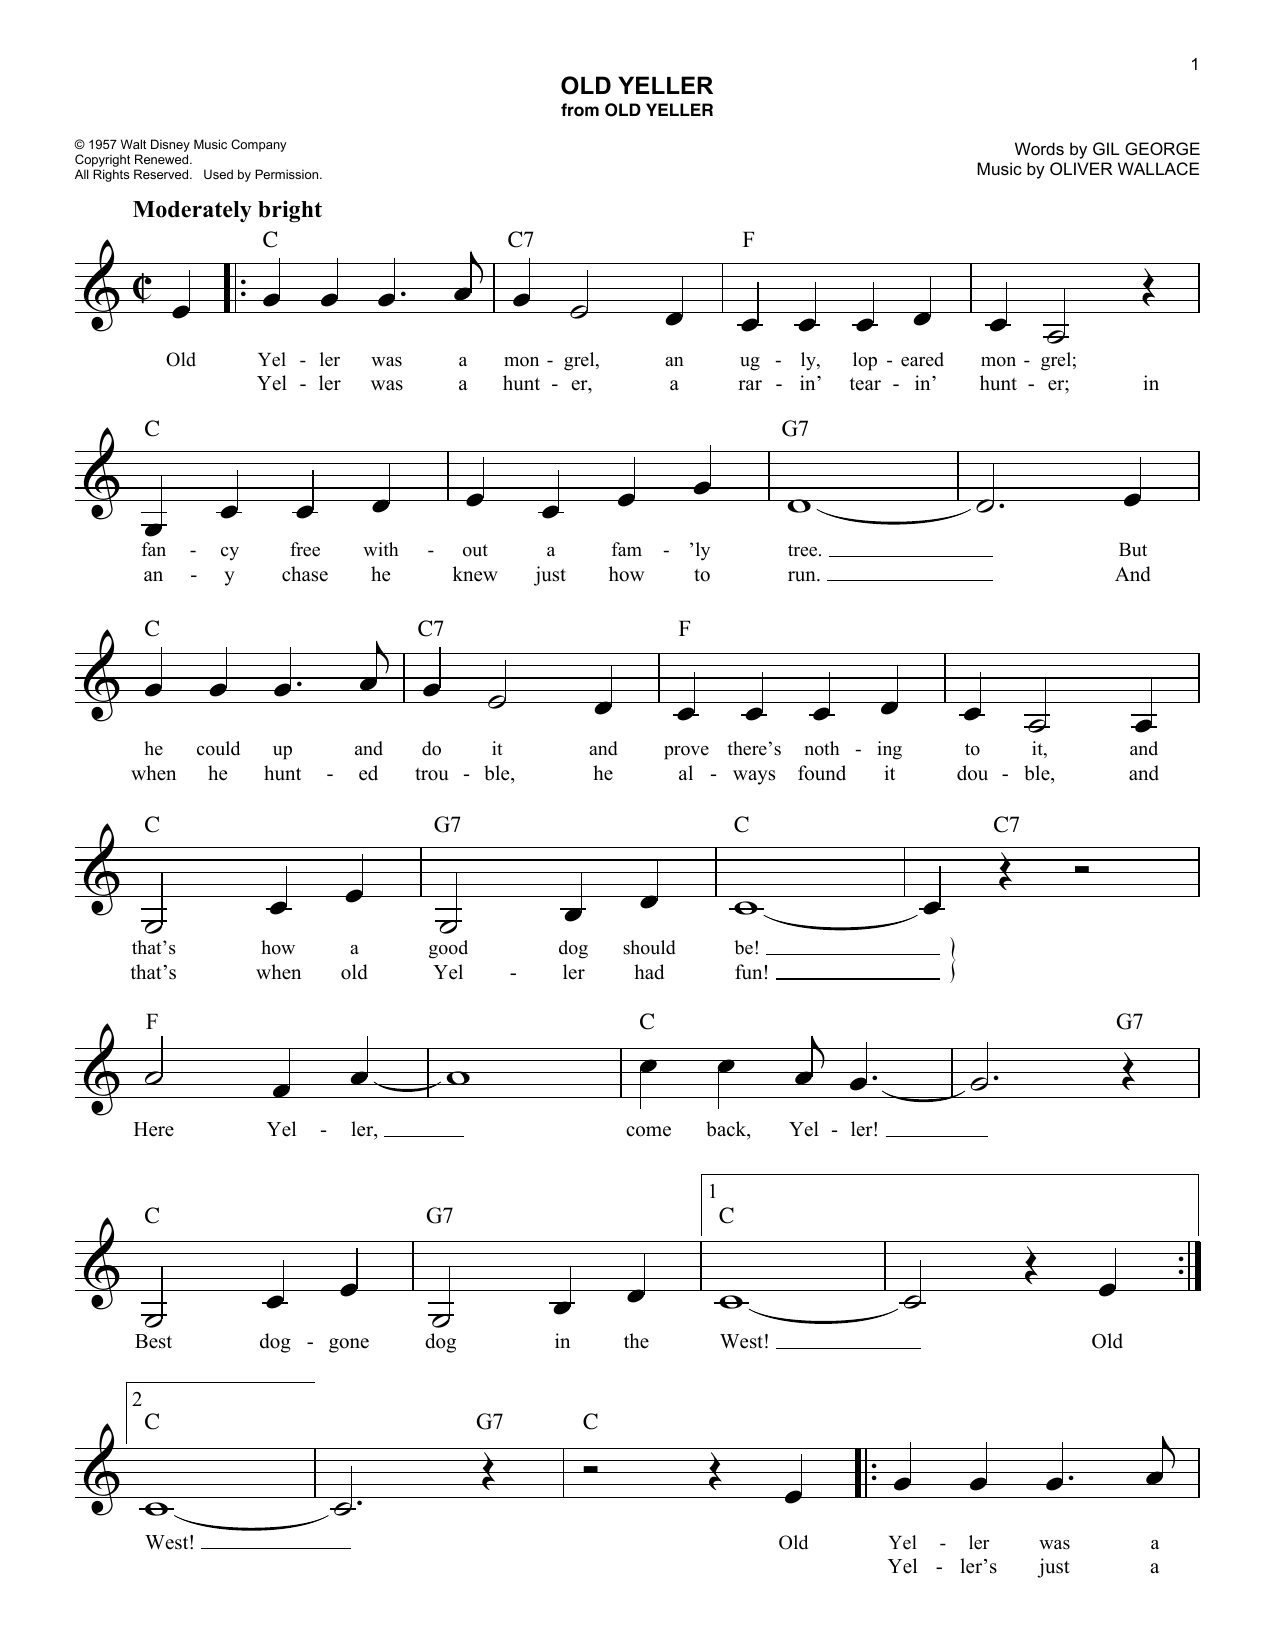 Oliver Wallace Old Yeller sheet music notes and chords. Download Printable PDF.